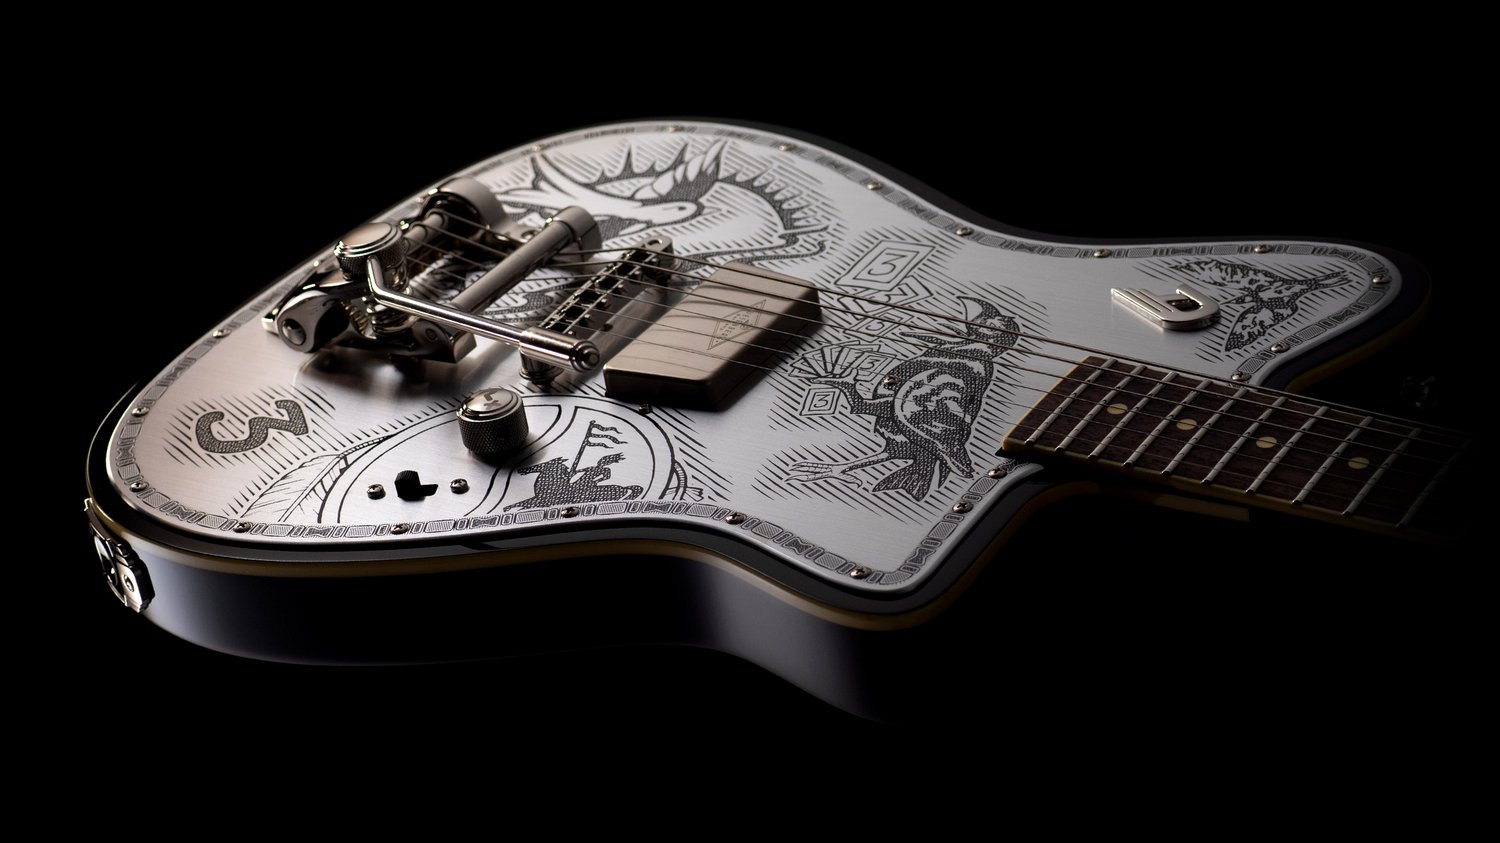 Angled view of the Duesenberg Alliance Series Johnny Depp